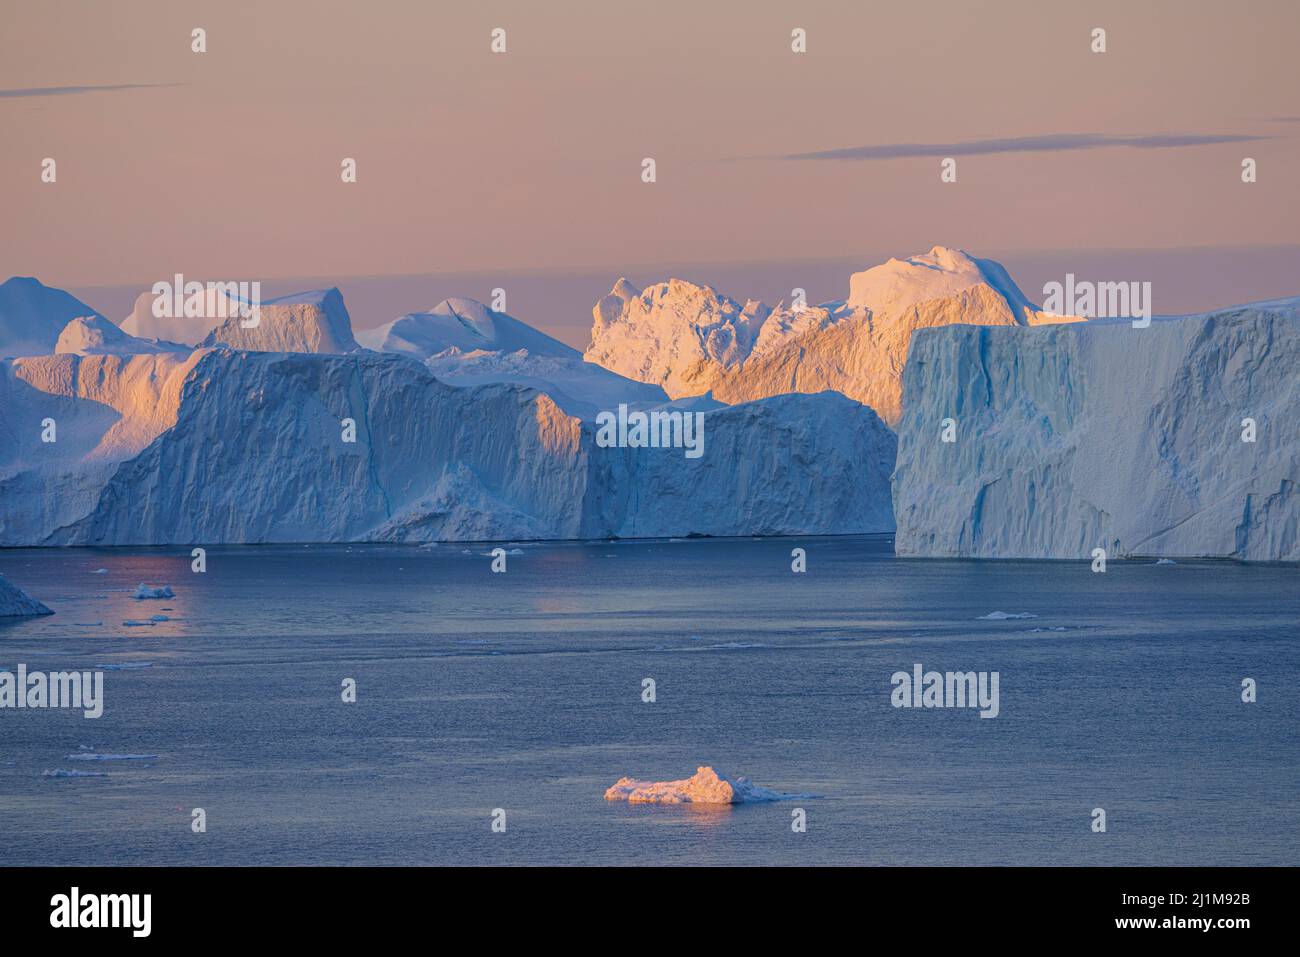 whimsical textures and shapes of the icebergs Stock Photo